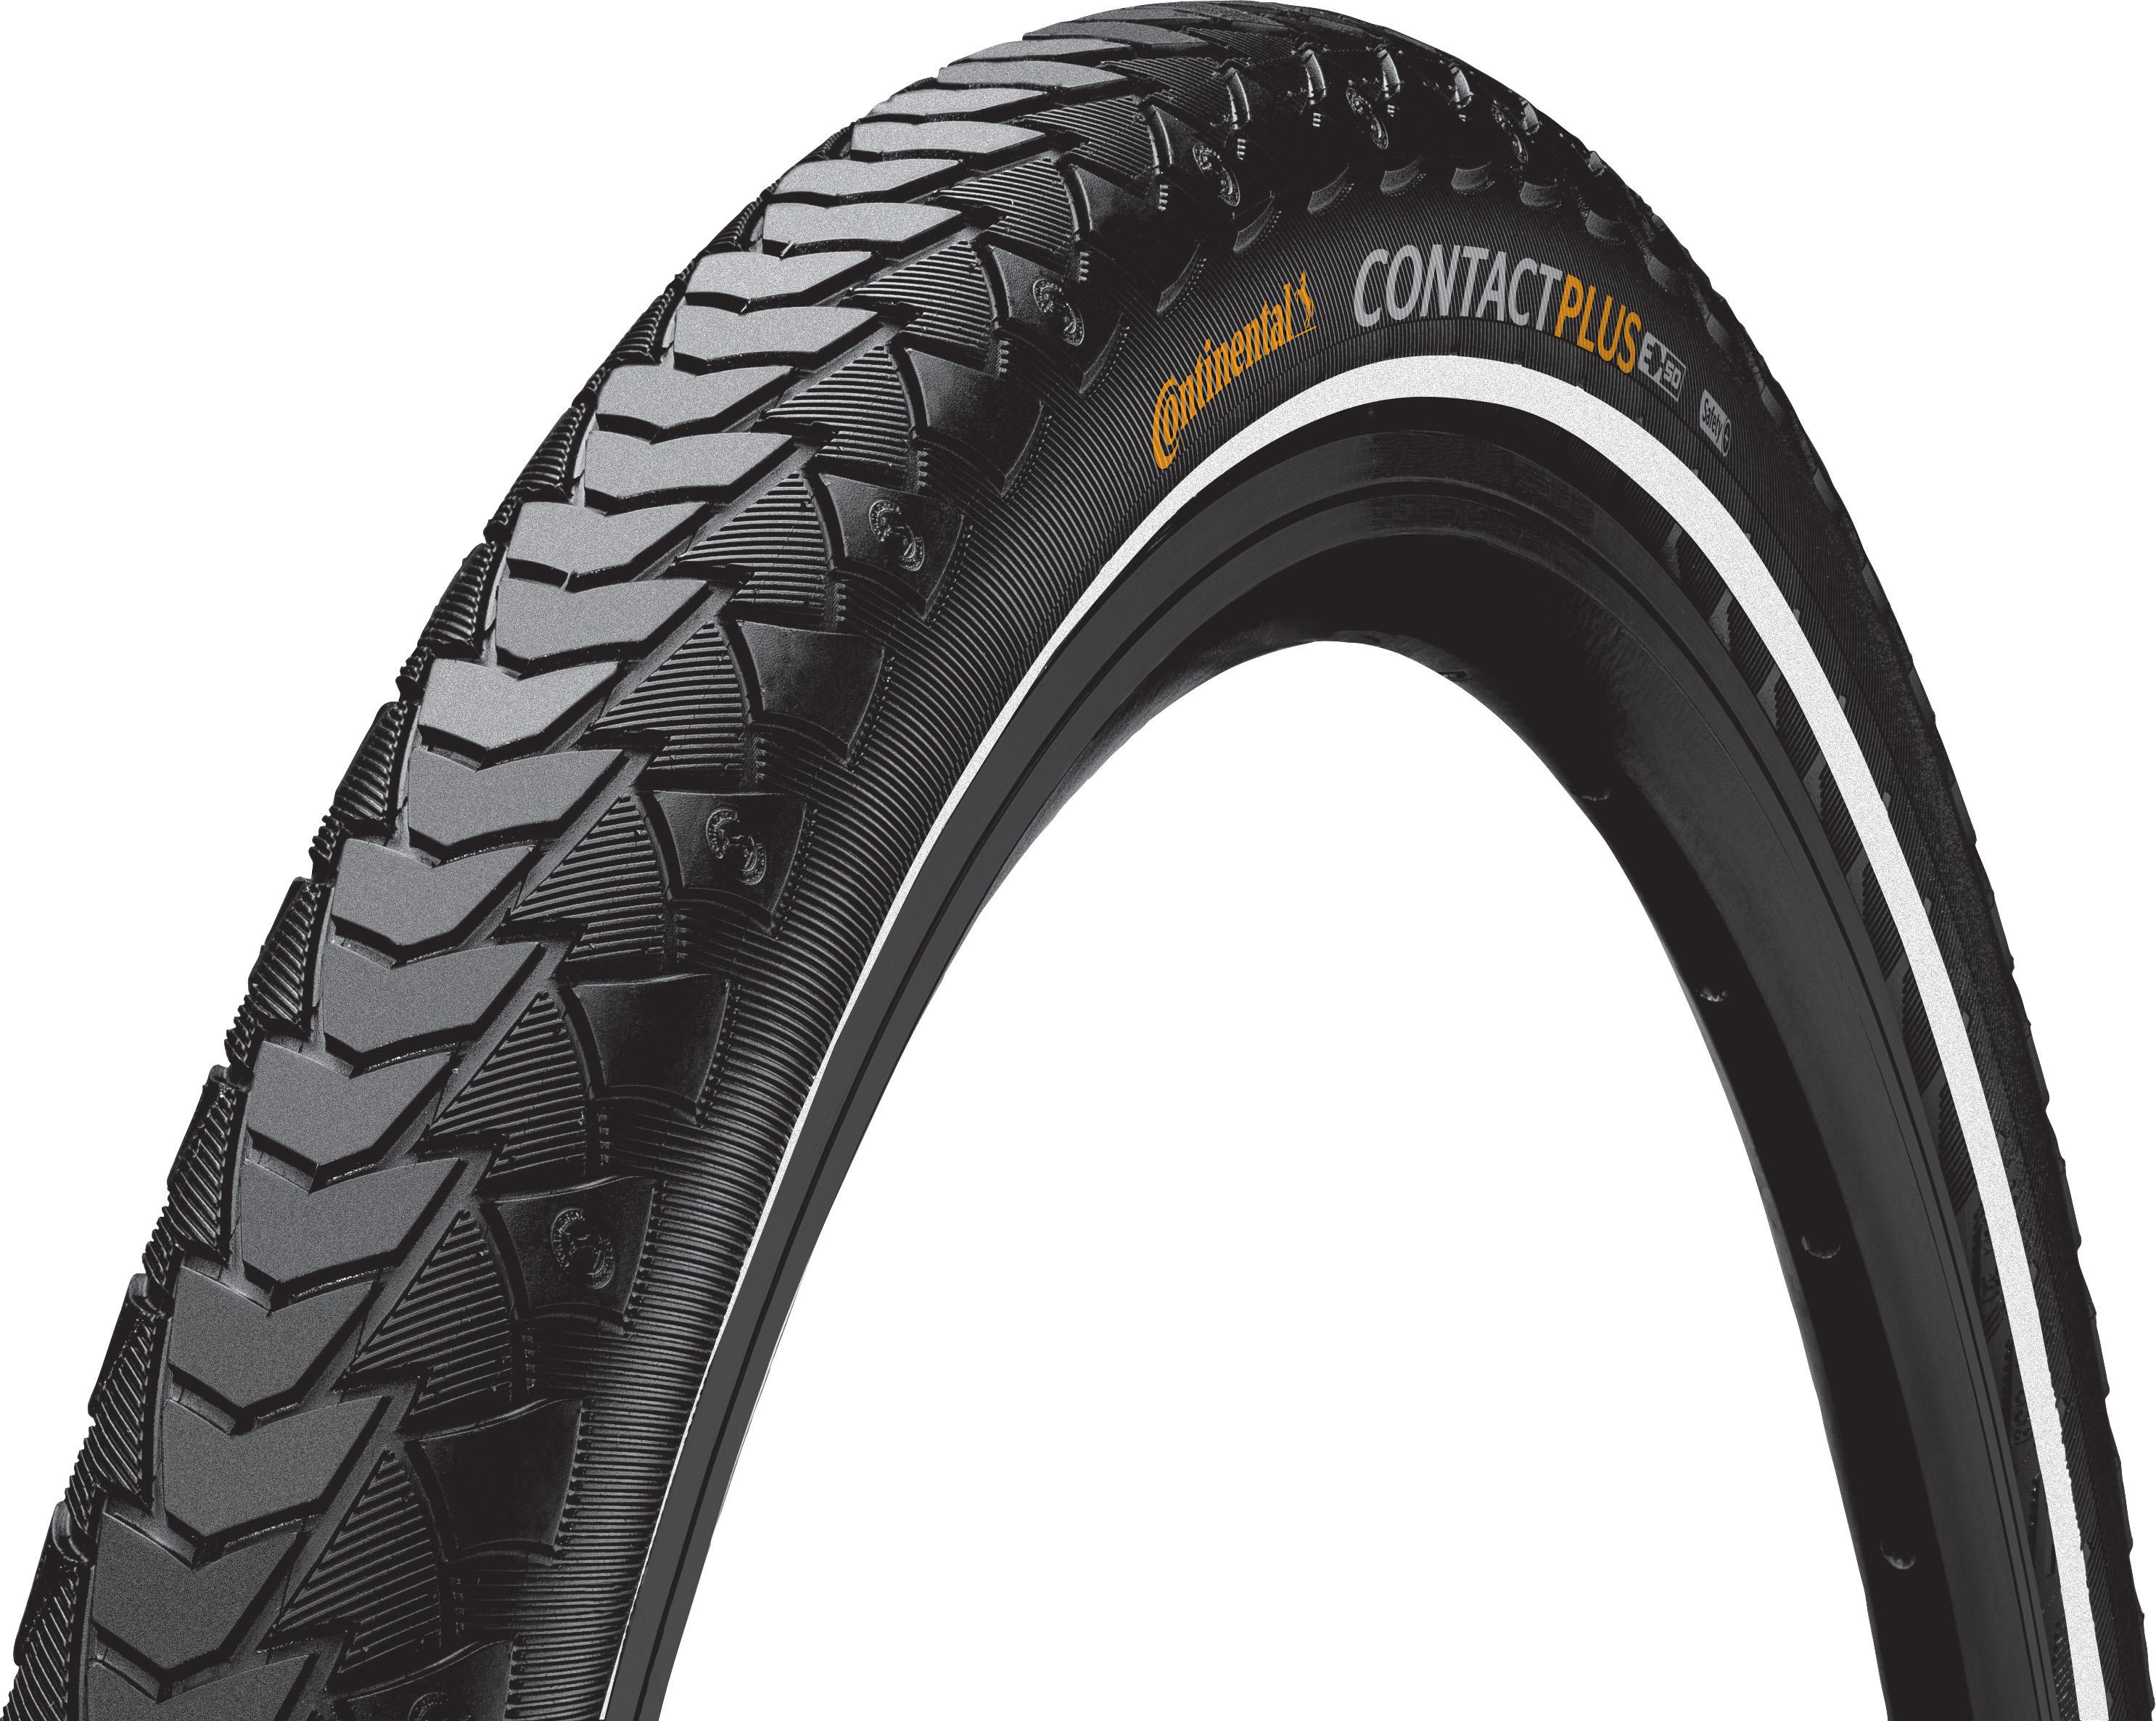 Continental Contact Plus City Touring Tyre - Black/reflex